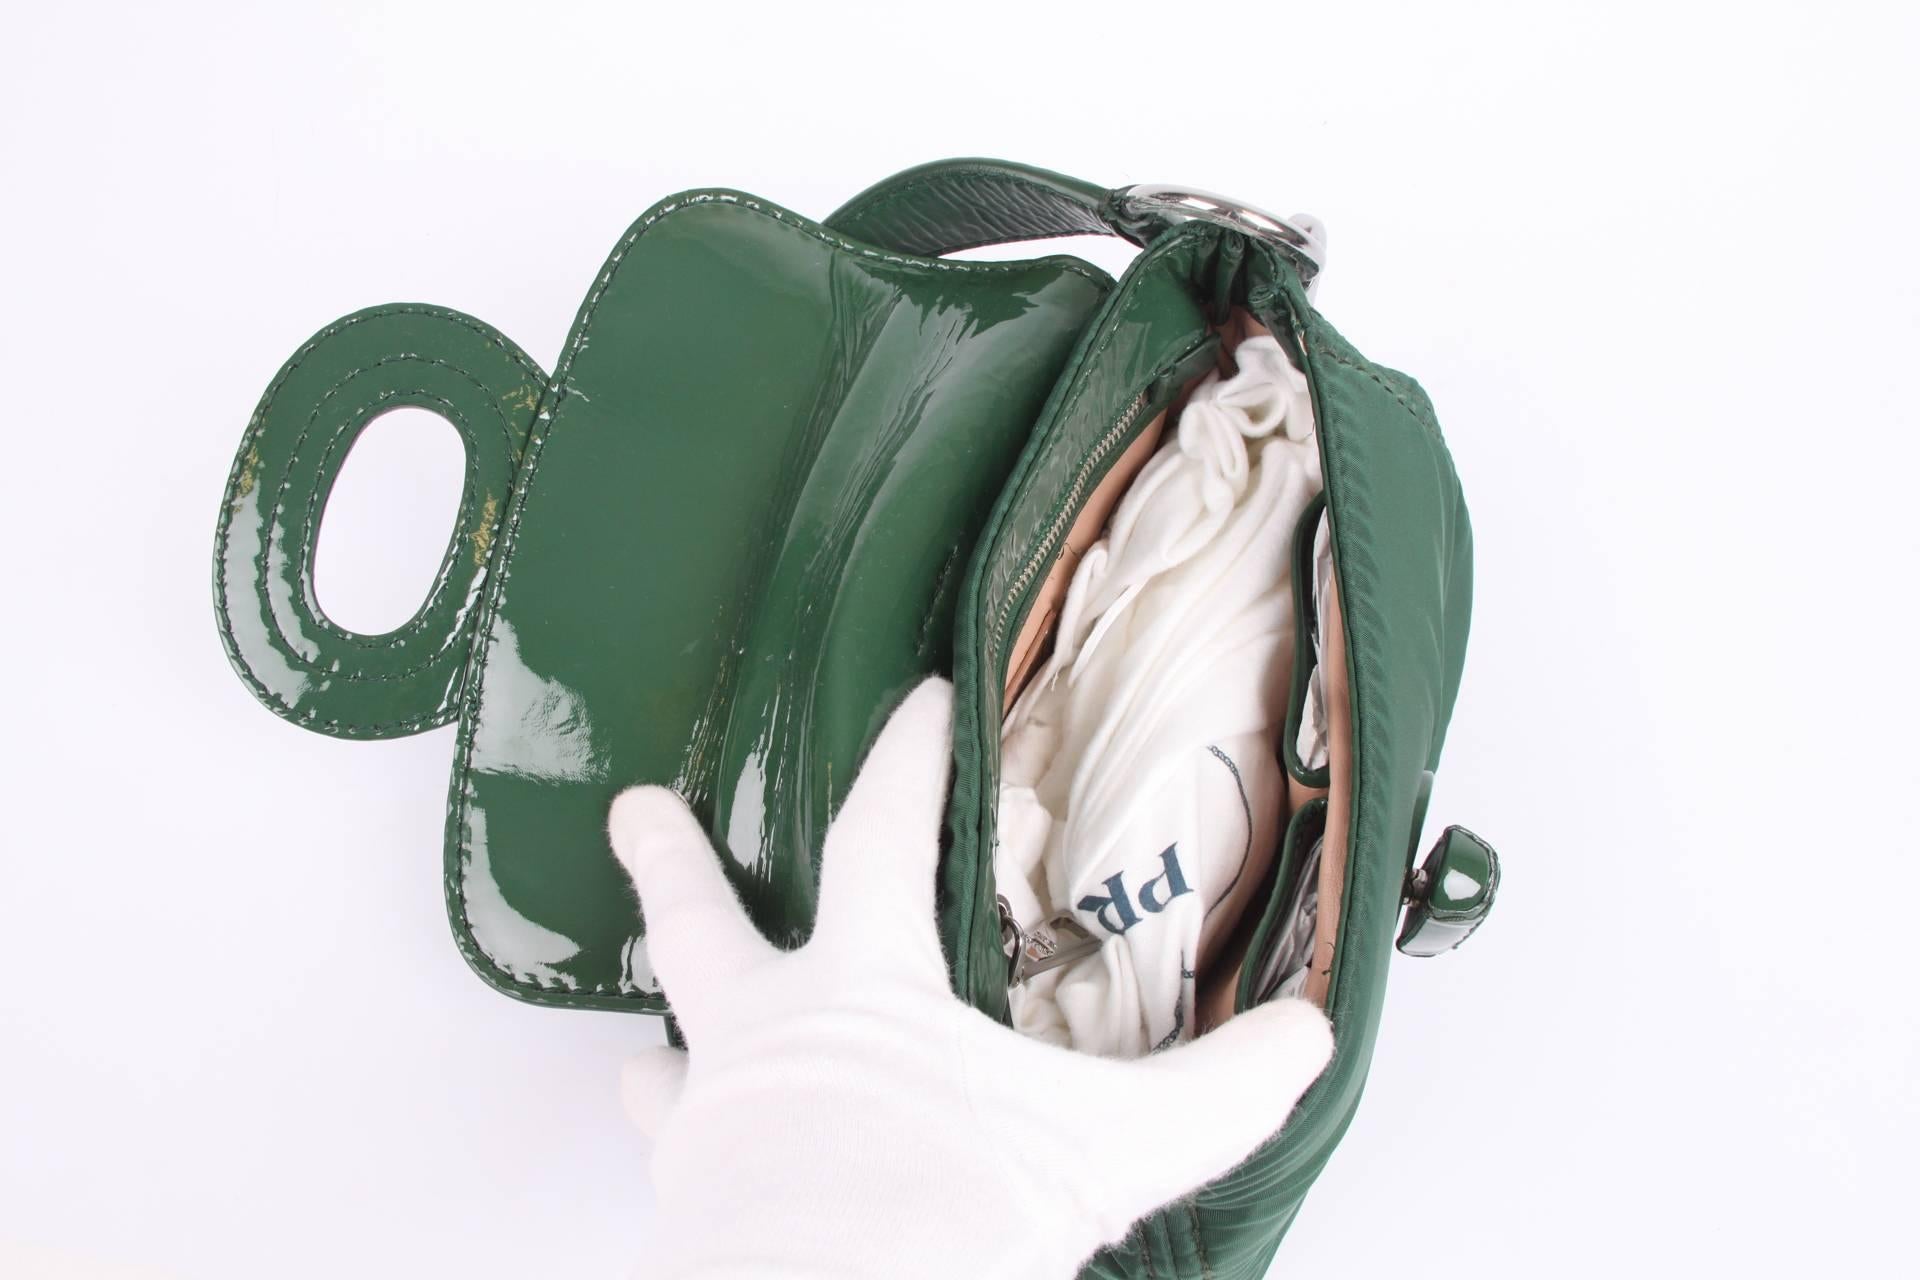 Practical shoulder bag by Prada; this is the Pattina Sottospalla Handbag in emerald green.

Crafted in nylon with patent leather detailing and silver-tone hardware. Large fold-over twist lock closure at the front. A silver-tone logo label inside and